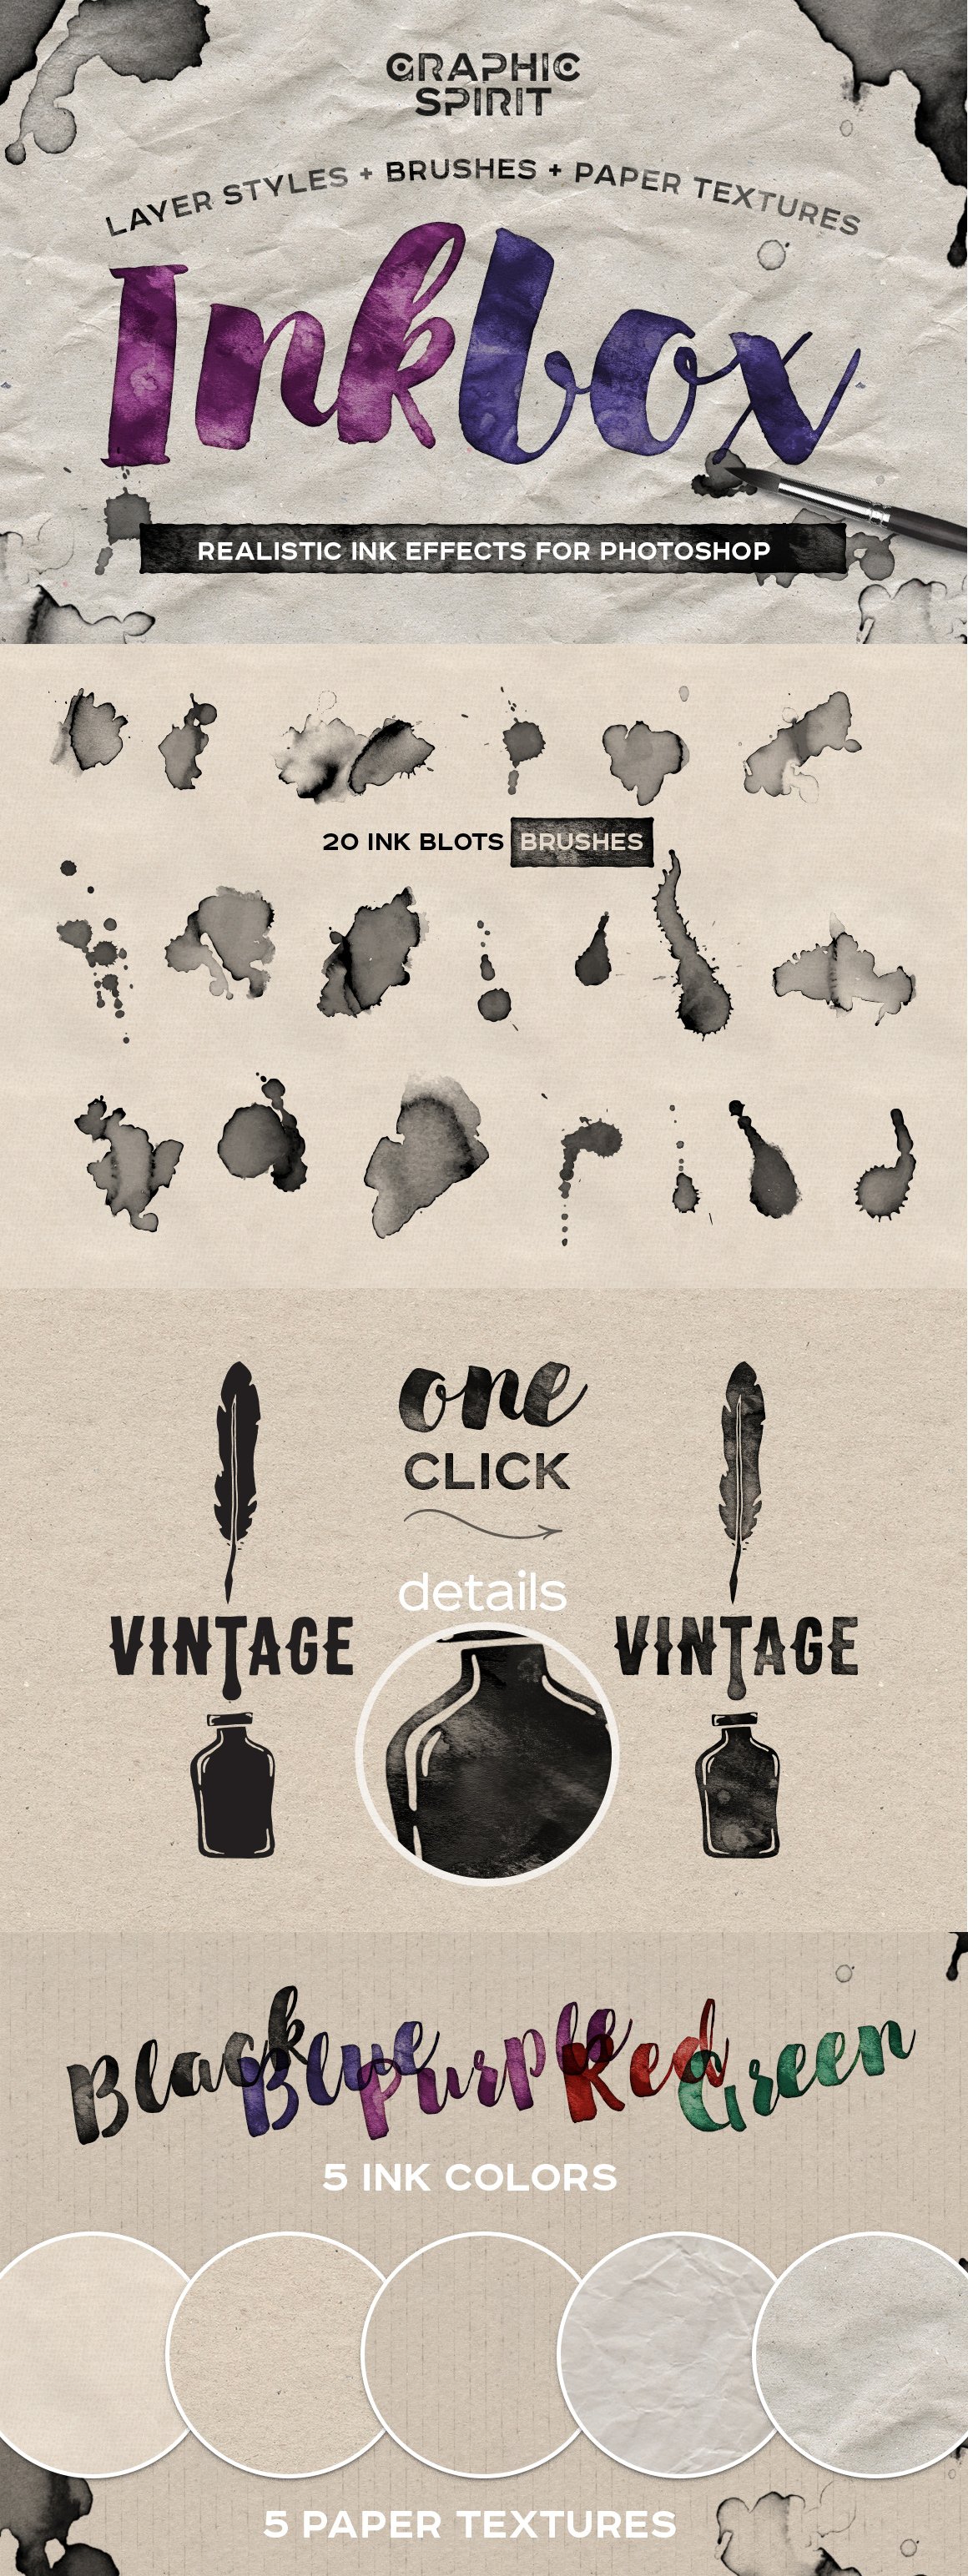 inkbox realistic ink effects 0 389